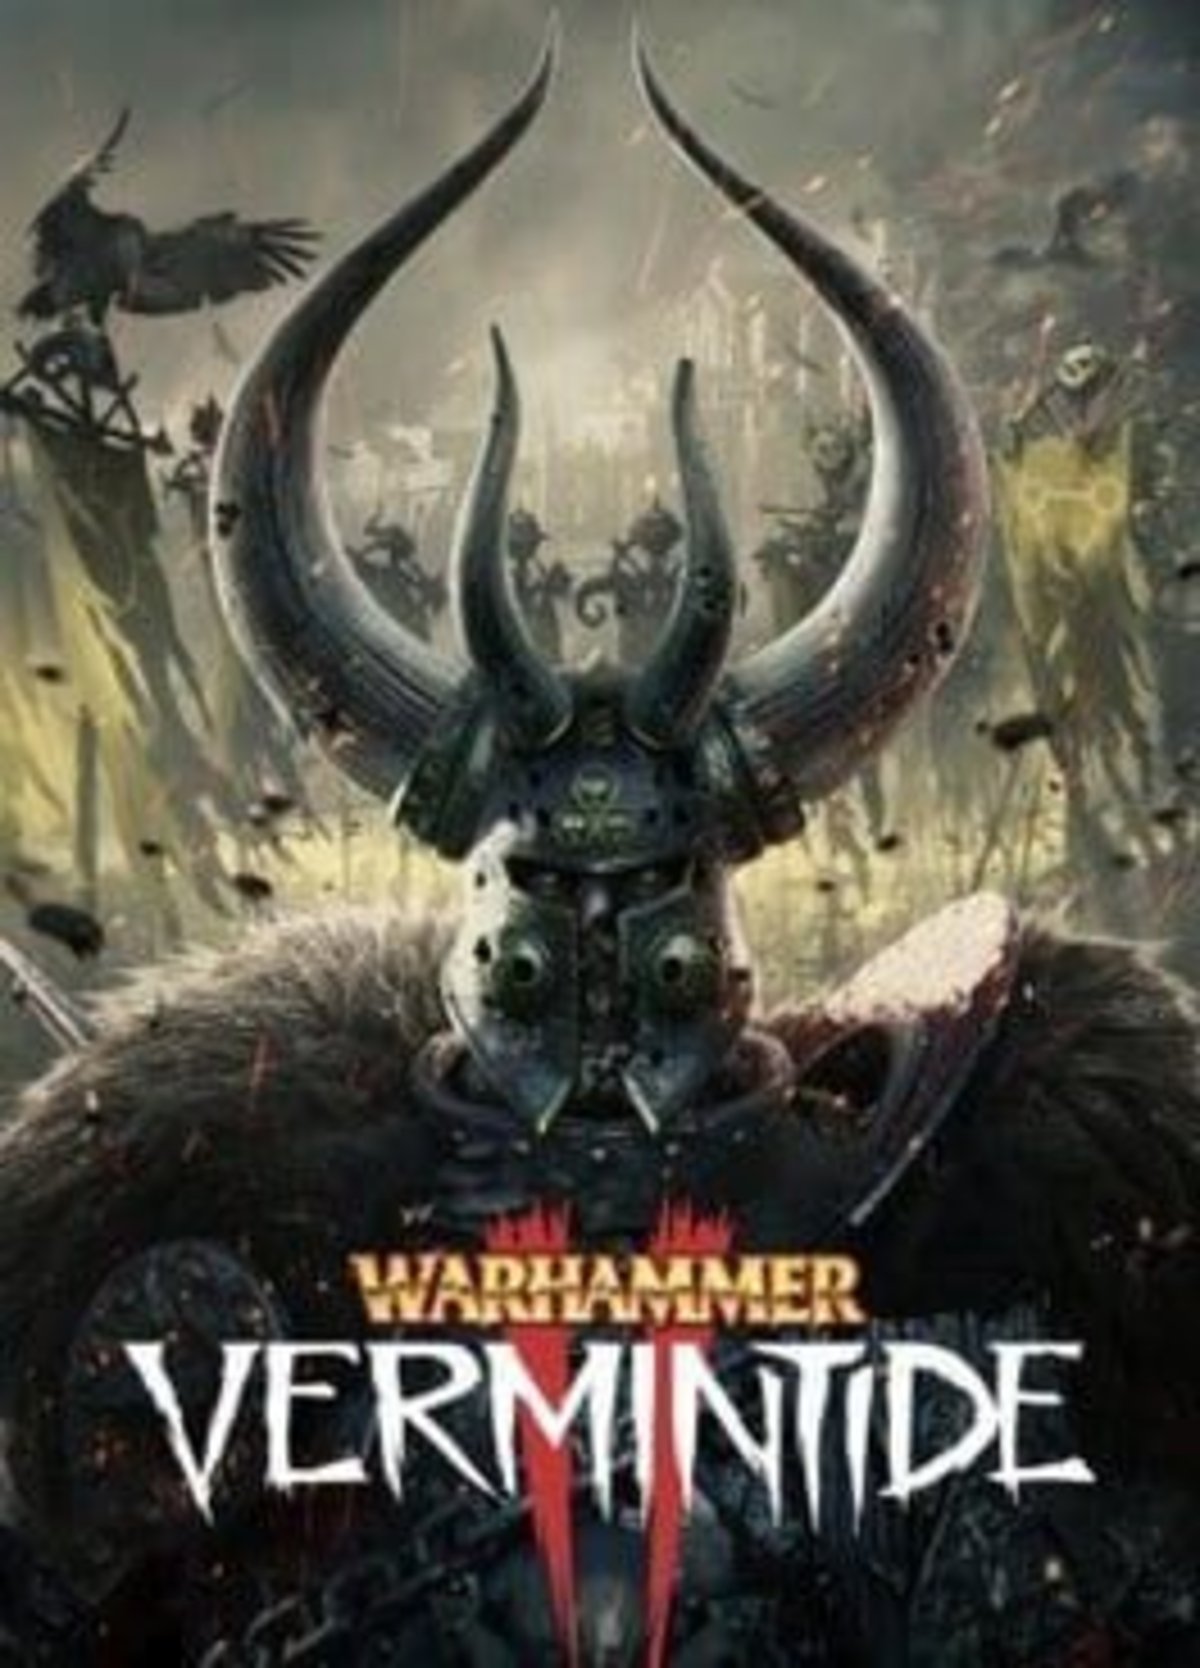 Warhammer Vermintide 2 is updated on PS5 with graphical and performance improvements